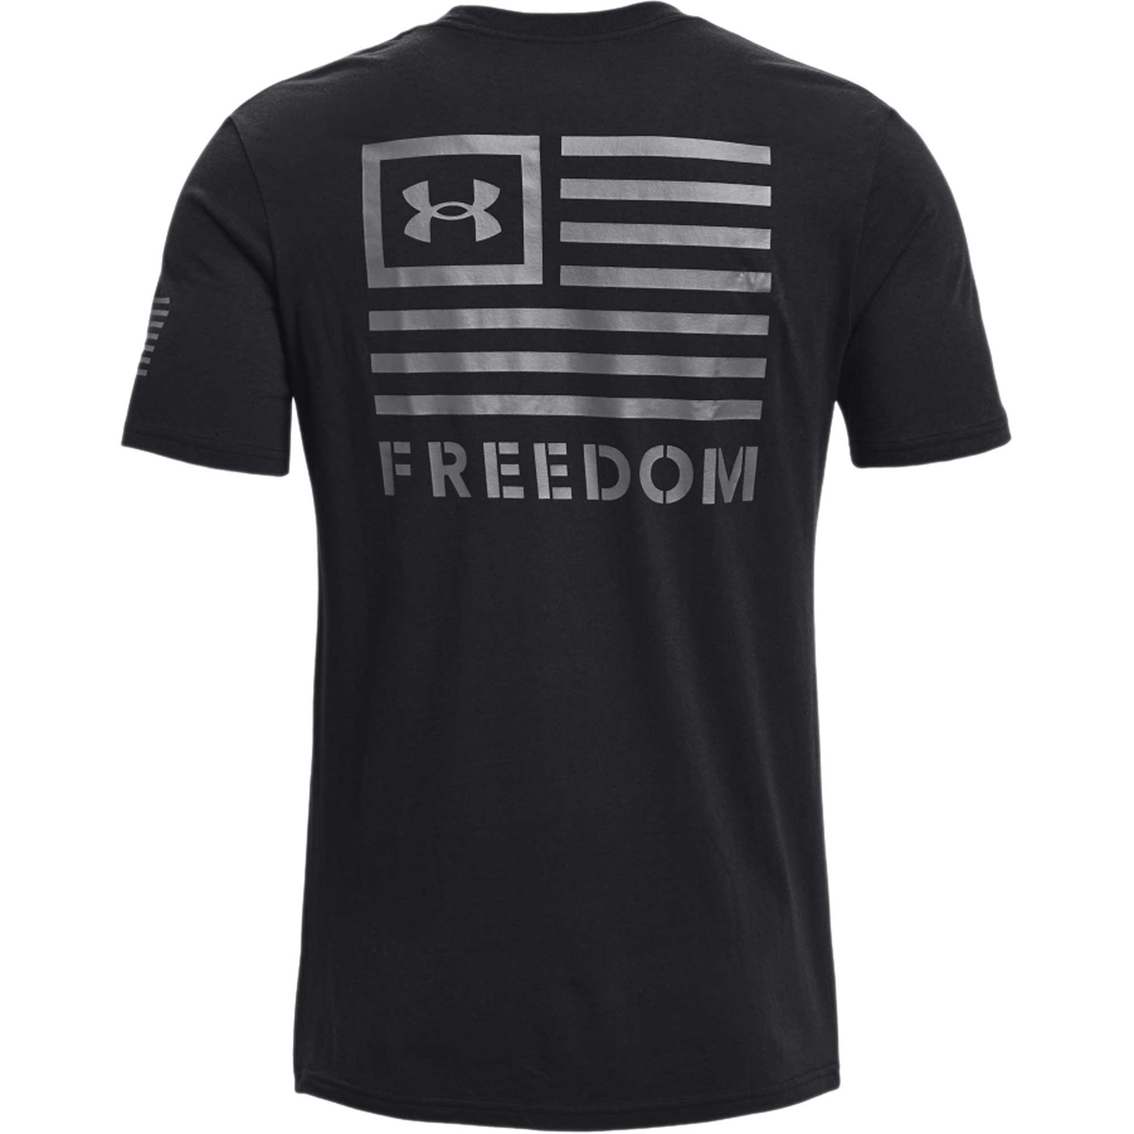 Under Armour New Freedom Banner Tee - Image 2 of 2